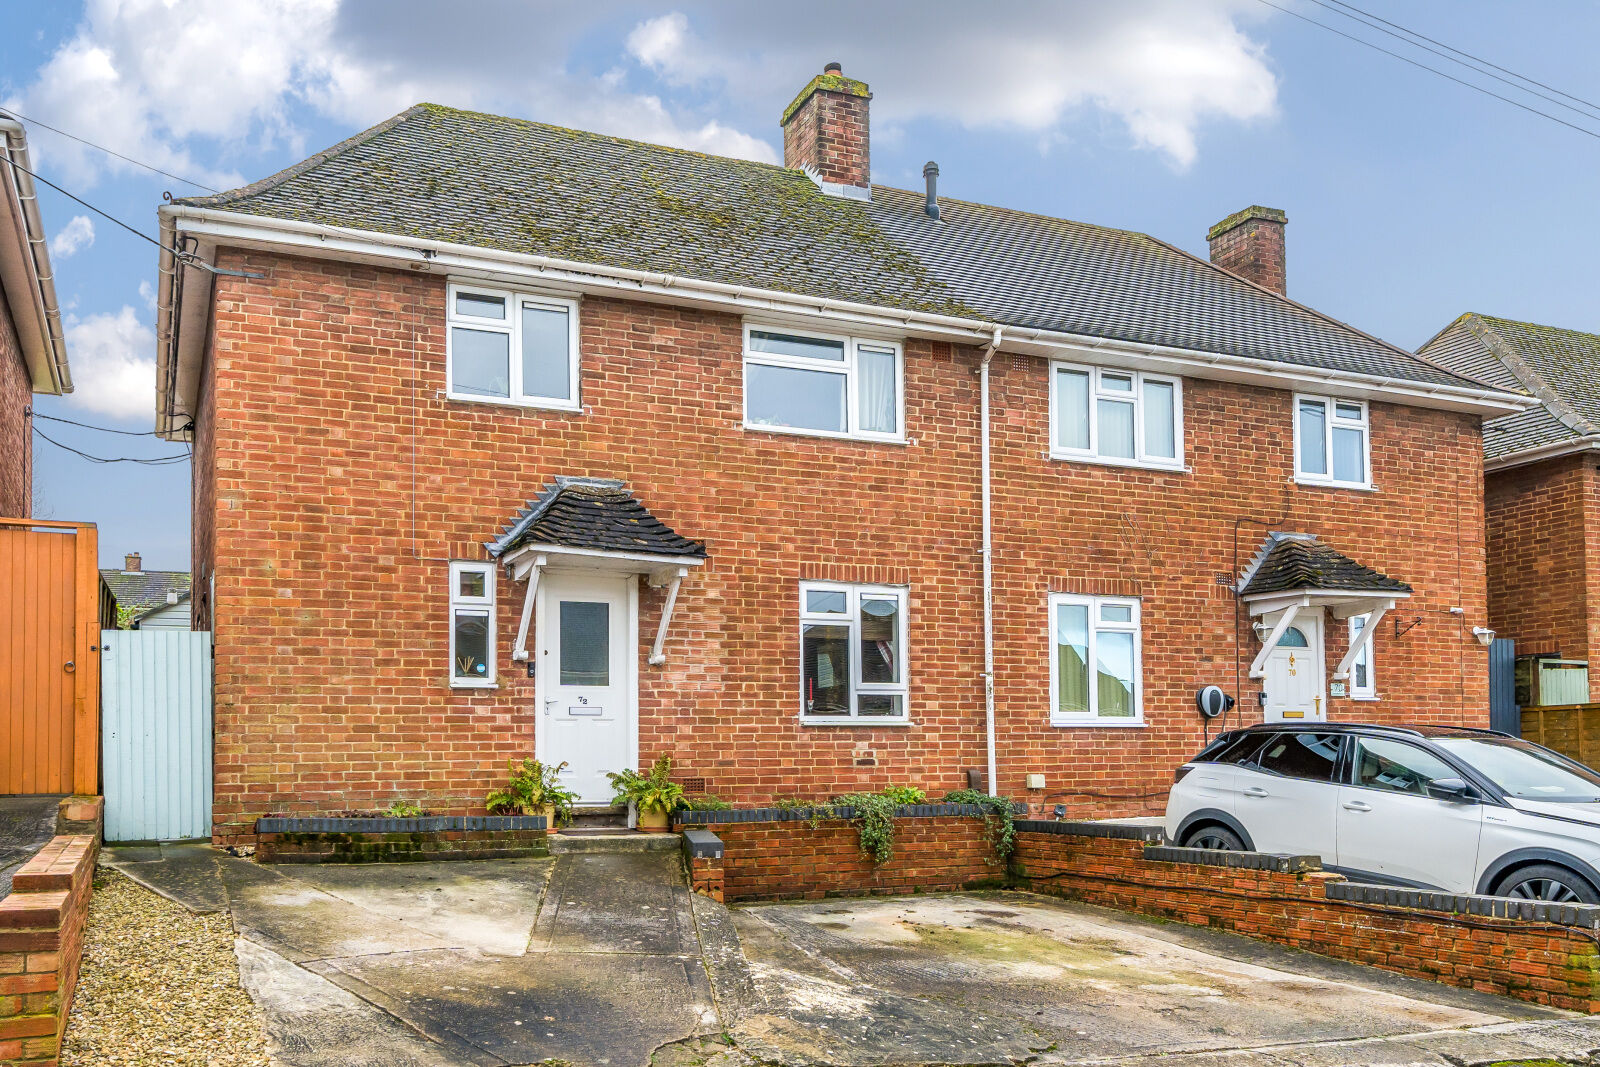 3 bedroom semi detached house for sale Springfield Road, Wantage, OX12, main image